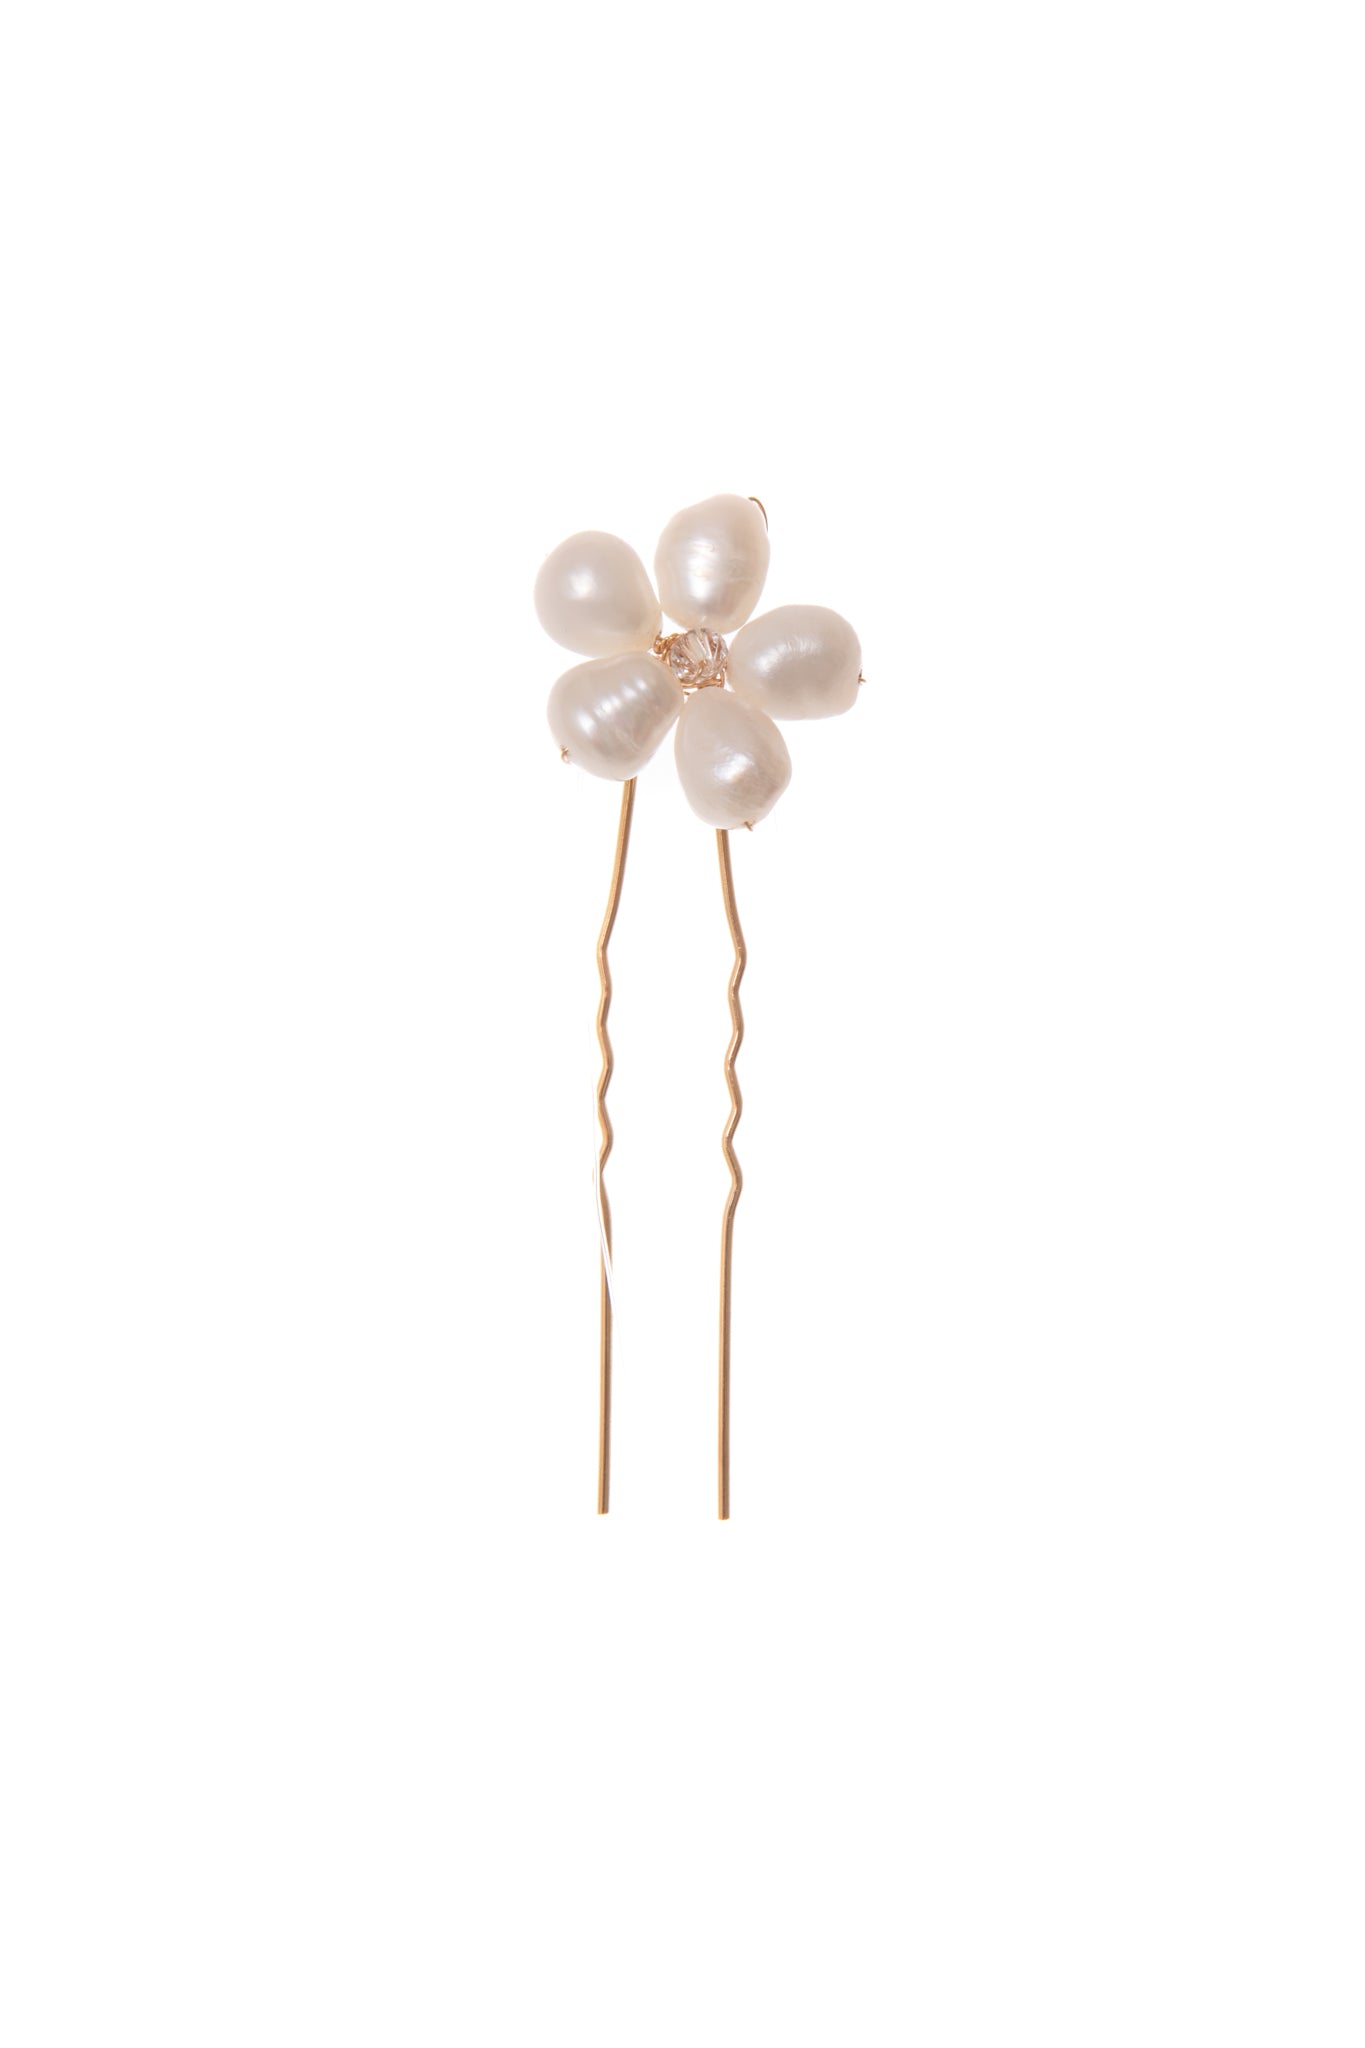 This dreamy freshwater pearl flower pin will take your breath away with its intricate beauty and delicate detail.